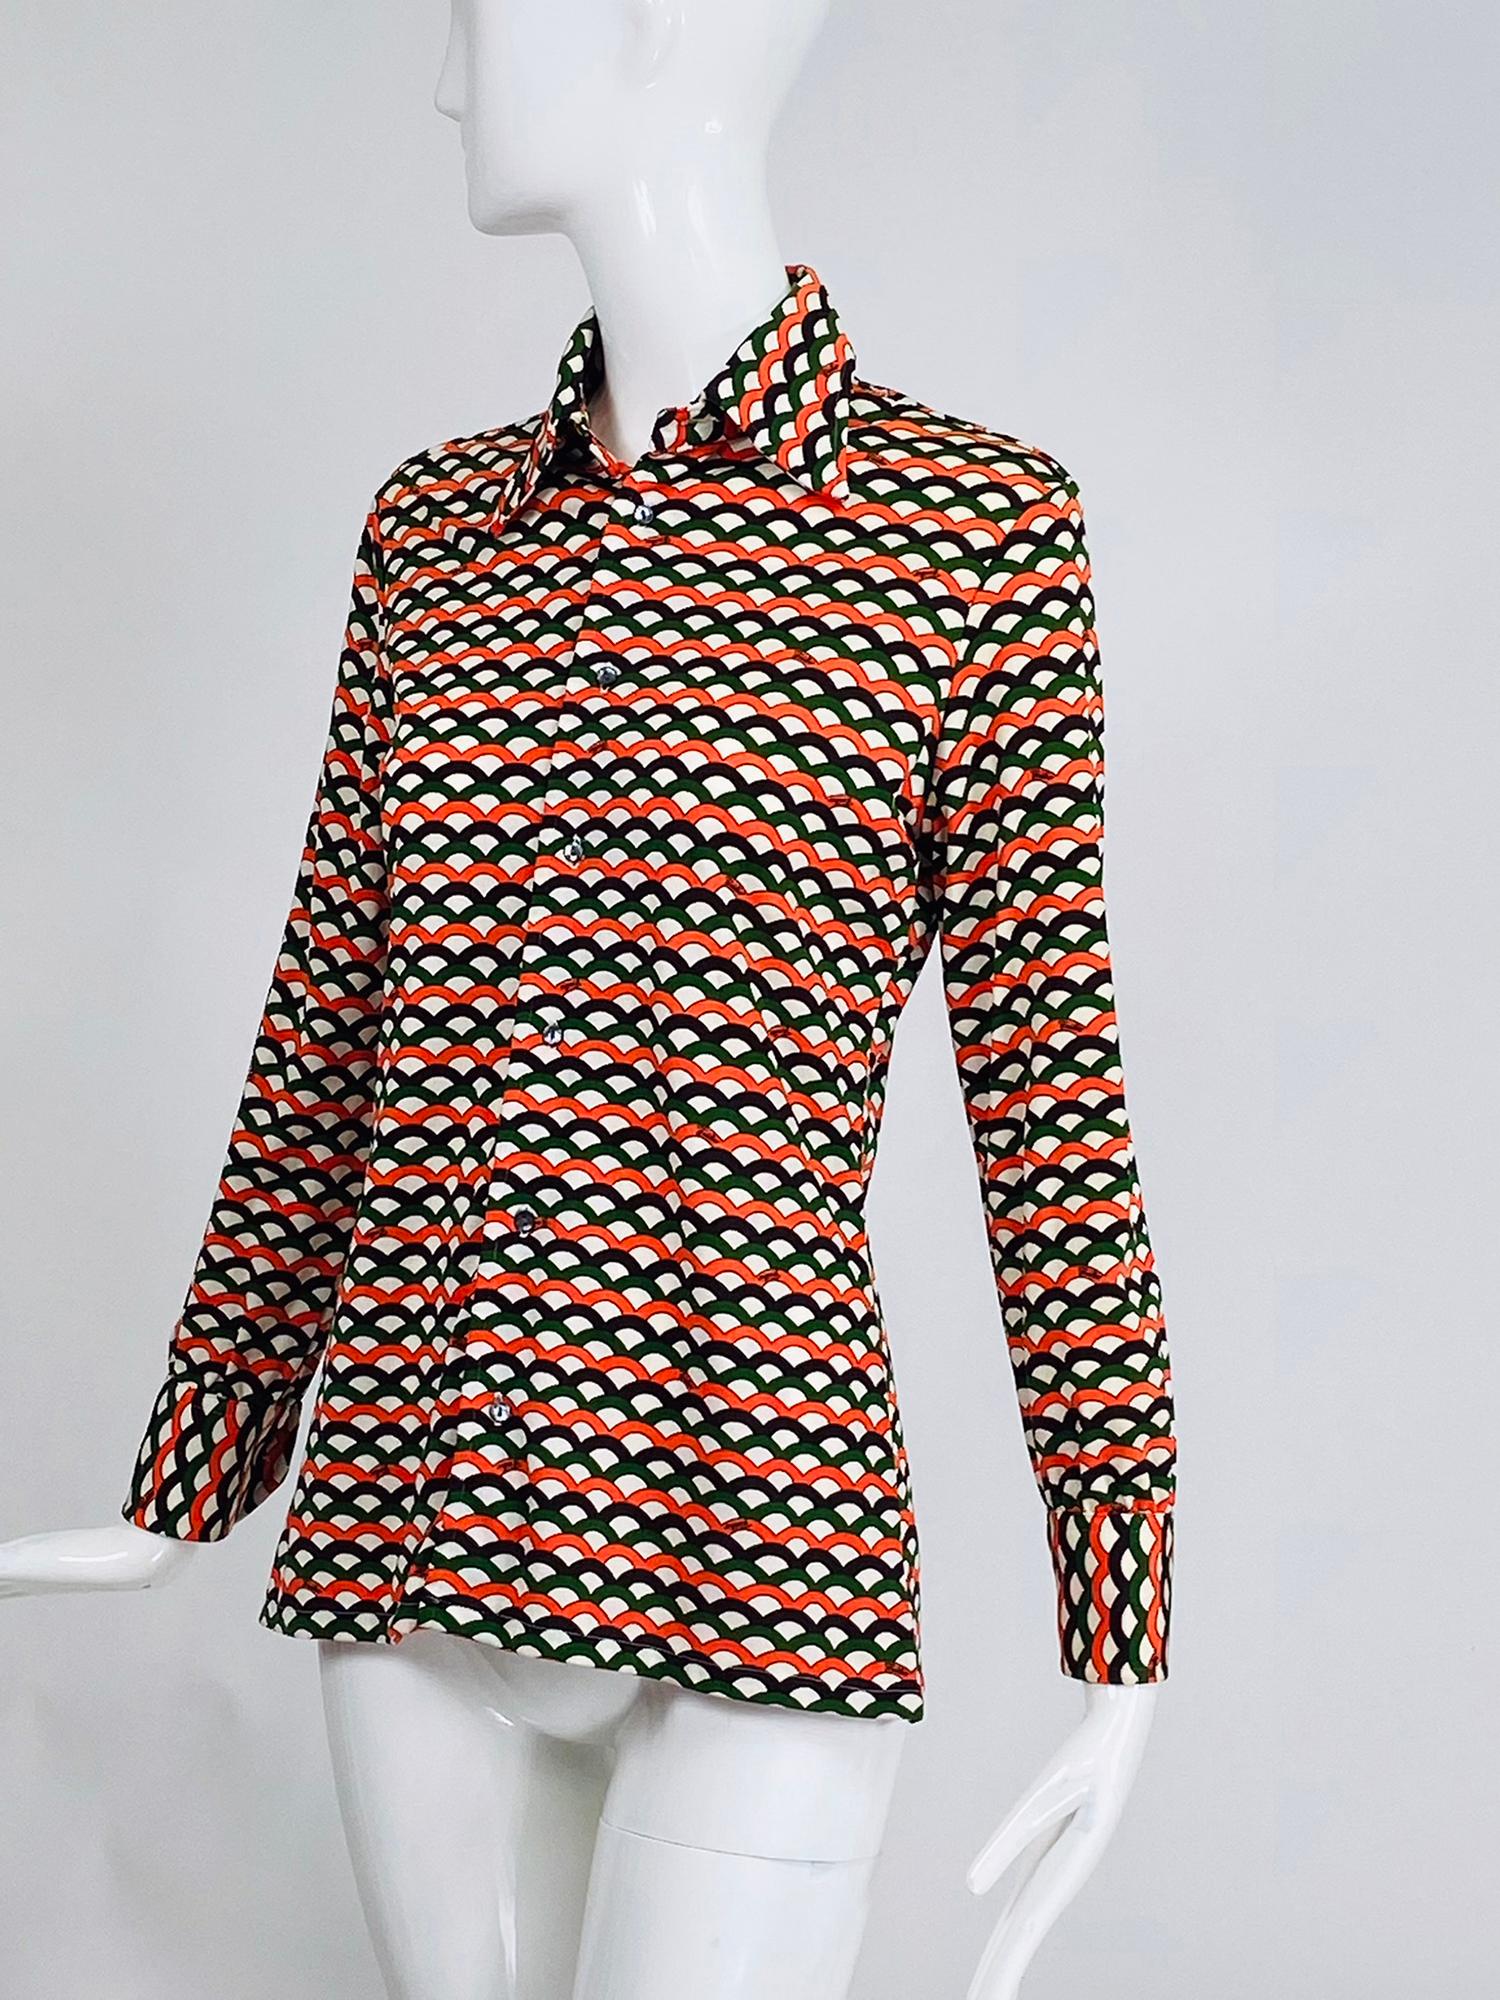 Emilio Pucci signed geometric print shirt from the 1970s. Long sleeve button front wing collar shirt, Charlie's Angels style in orange, white, black and green. Fitted shirt done in silky polyester. Marked size 10, fits like a size 4.
     In